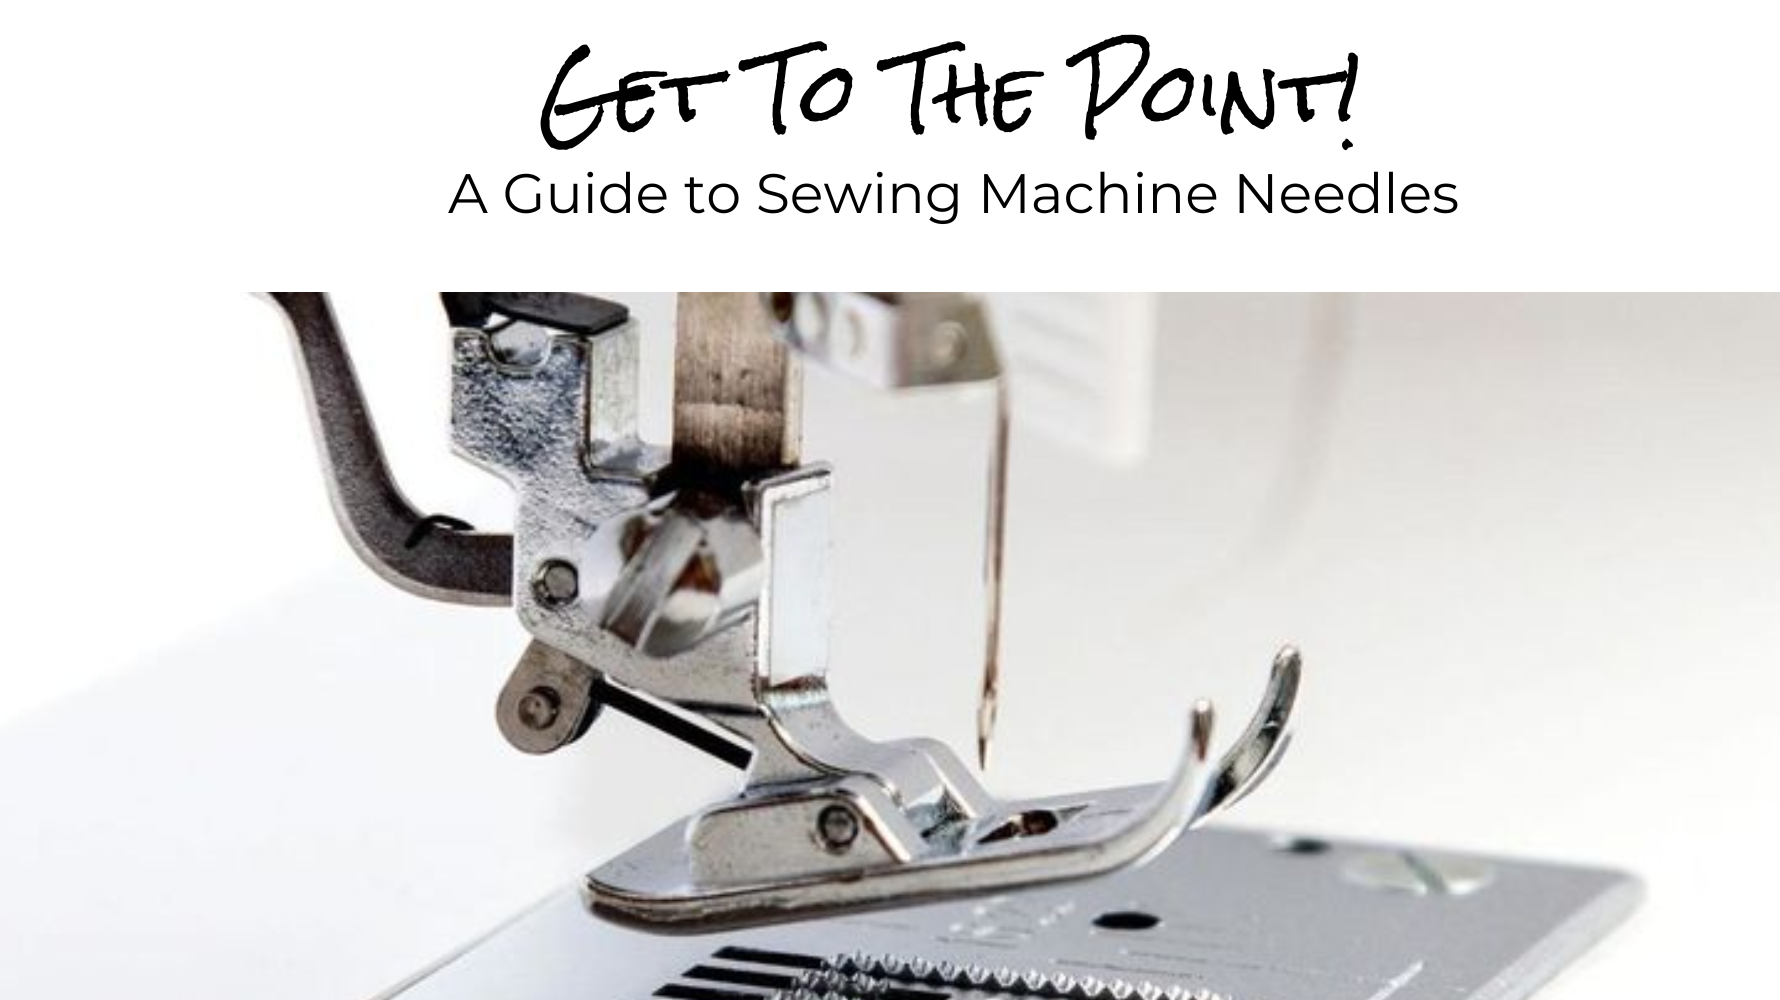 Guide to Sewing Machine Needles for Quilters